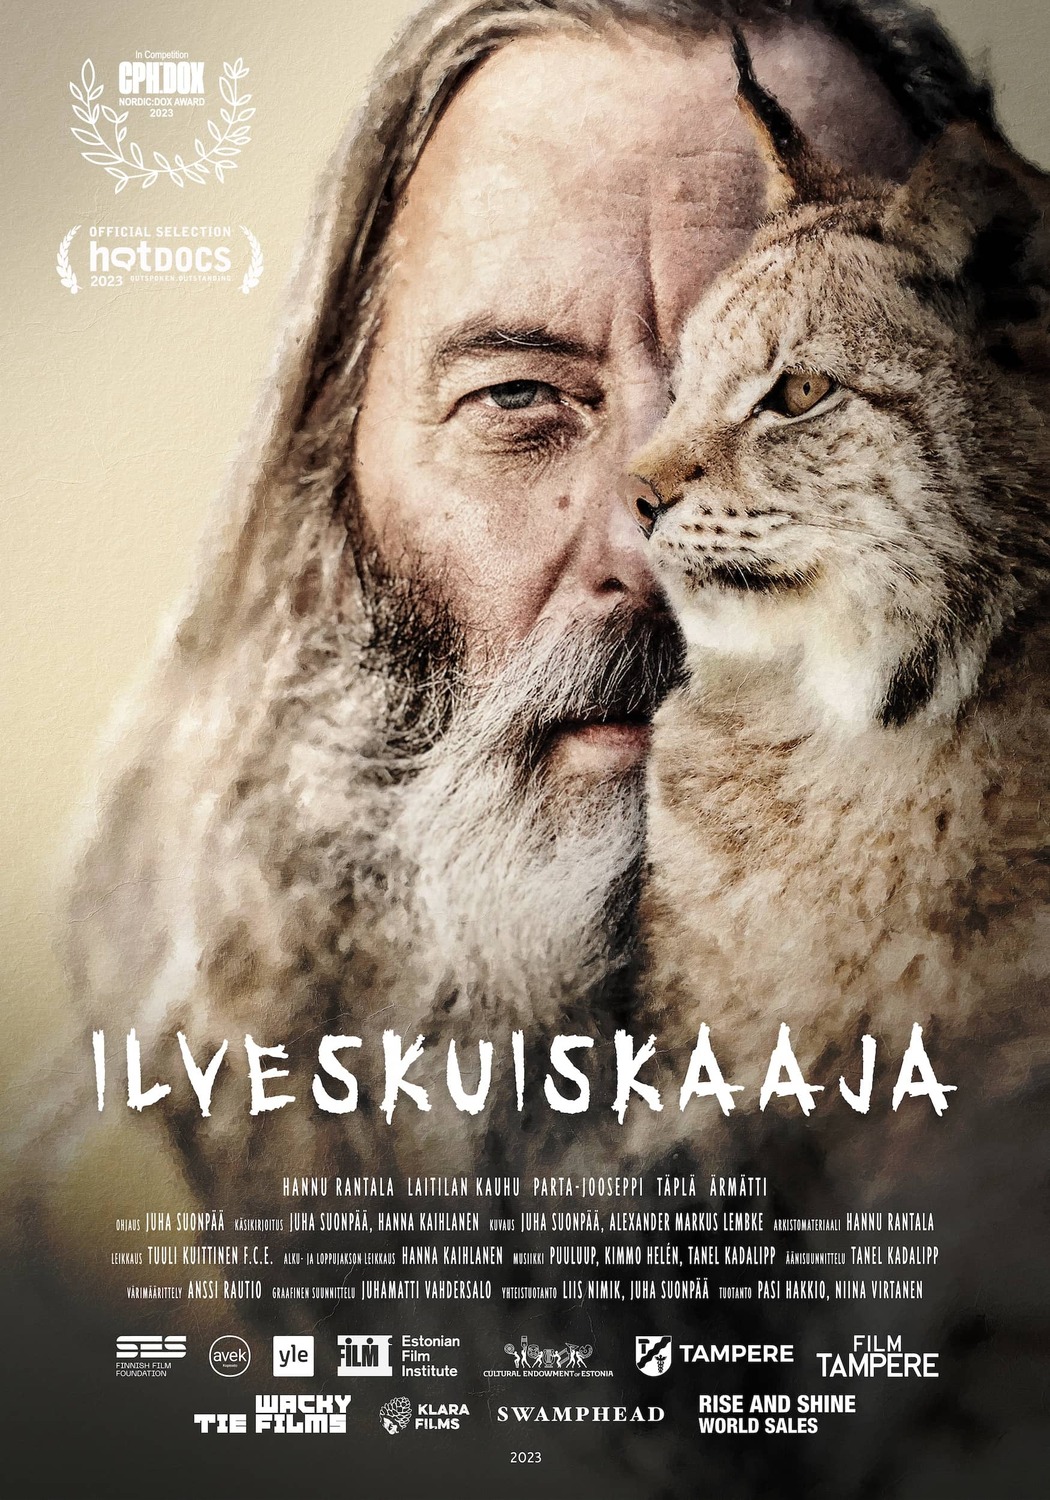 Extra Large Movie Poster Image for Ilveskuiskaaja 